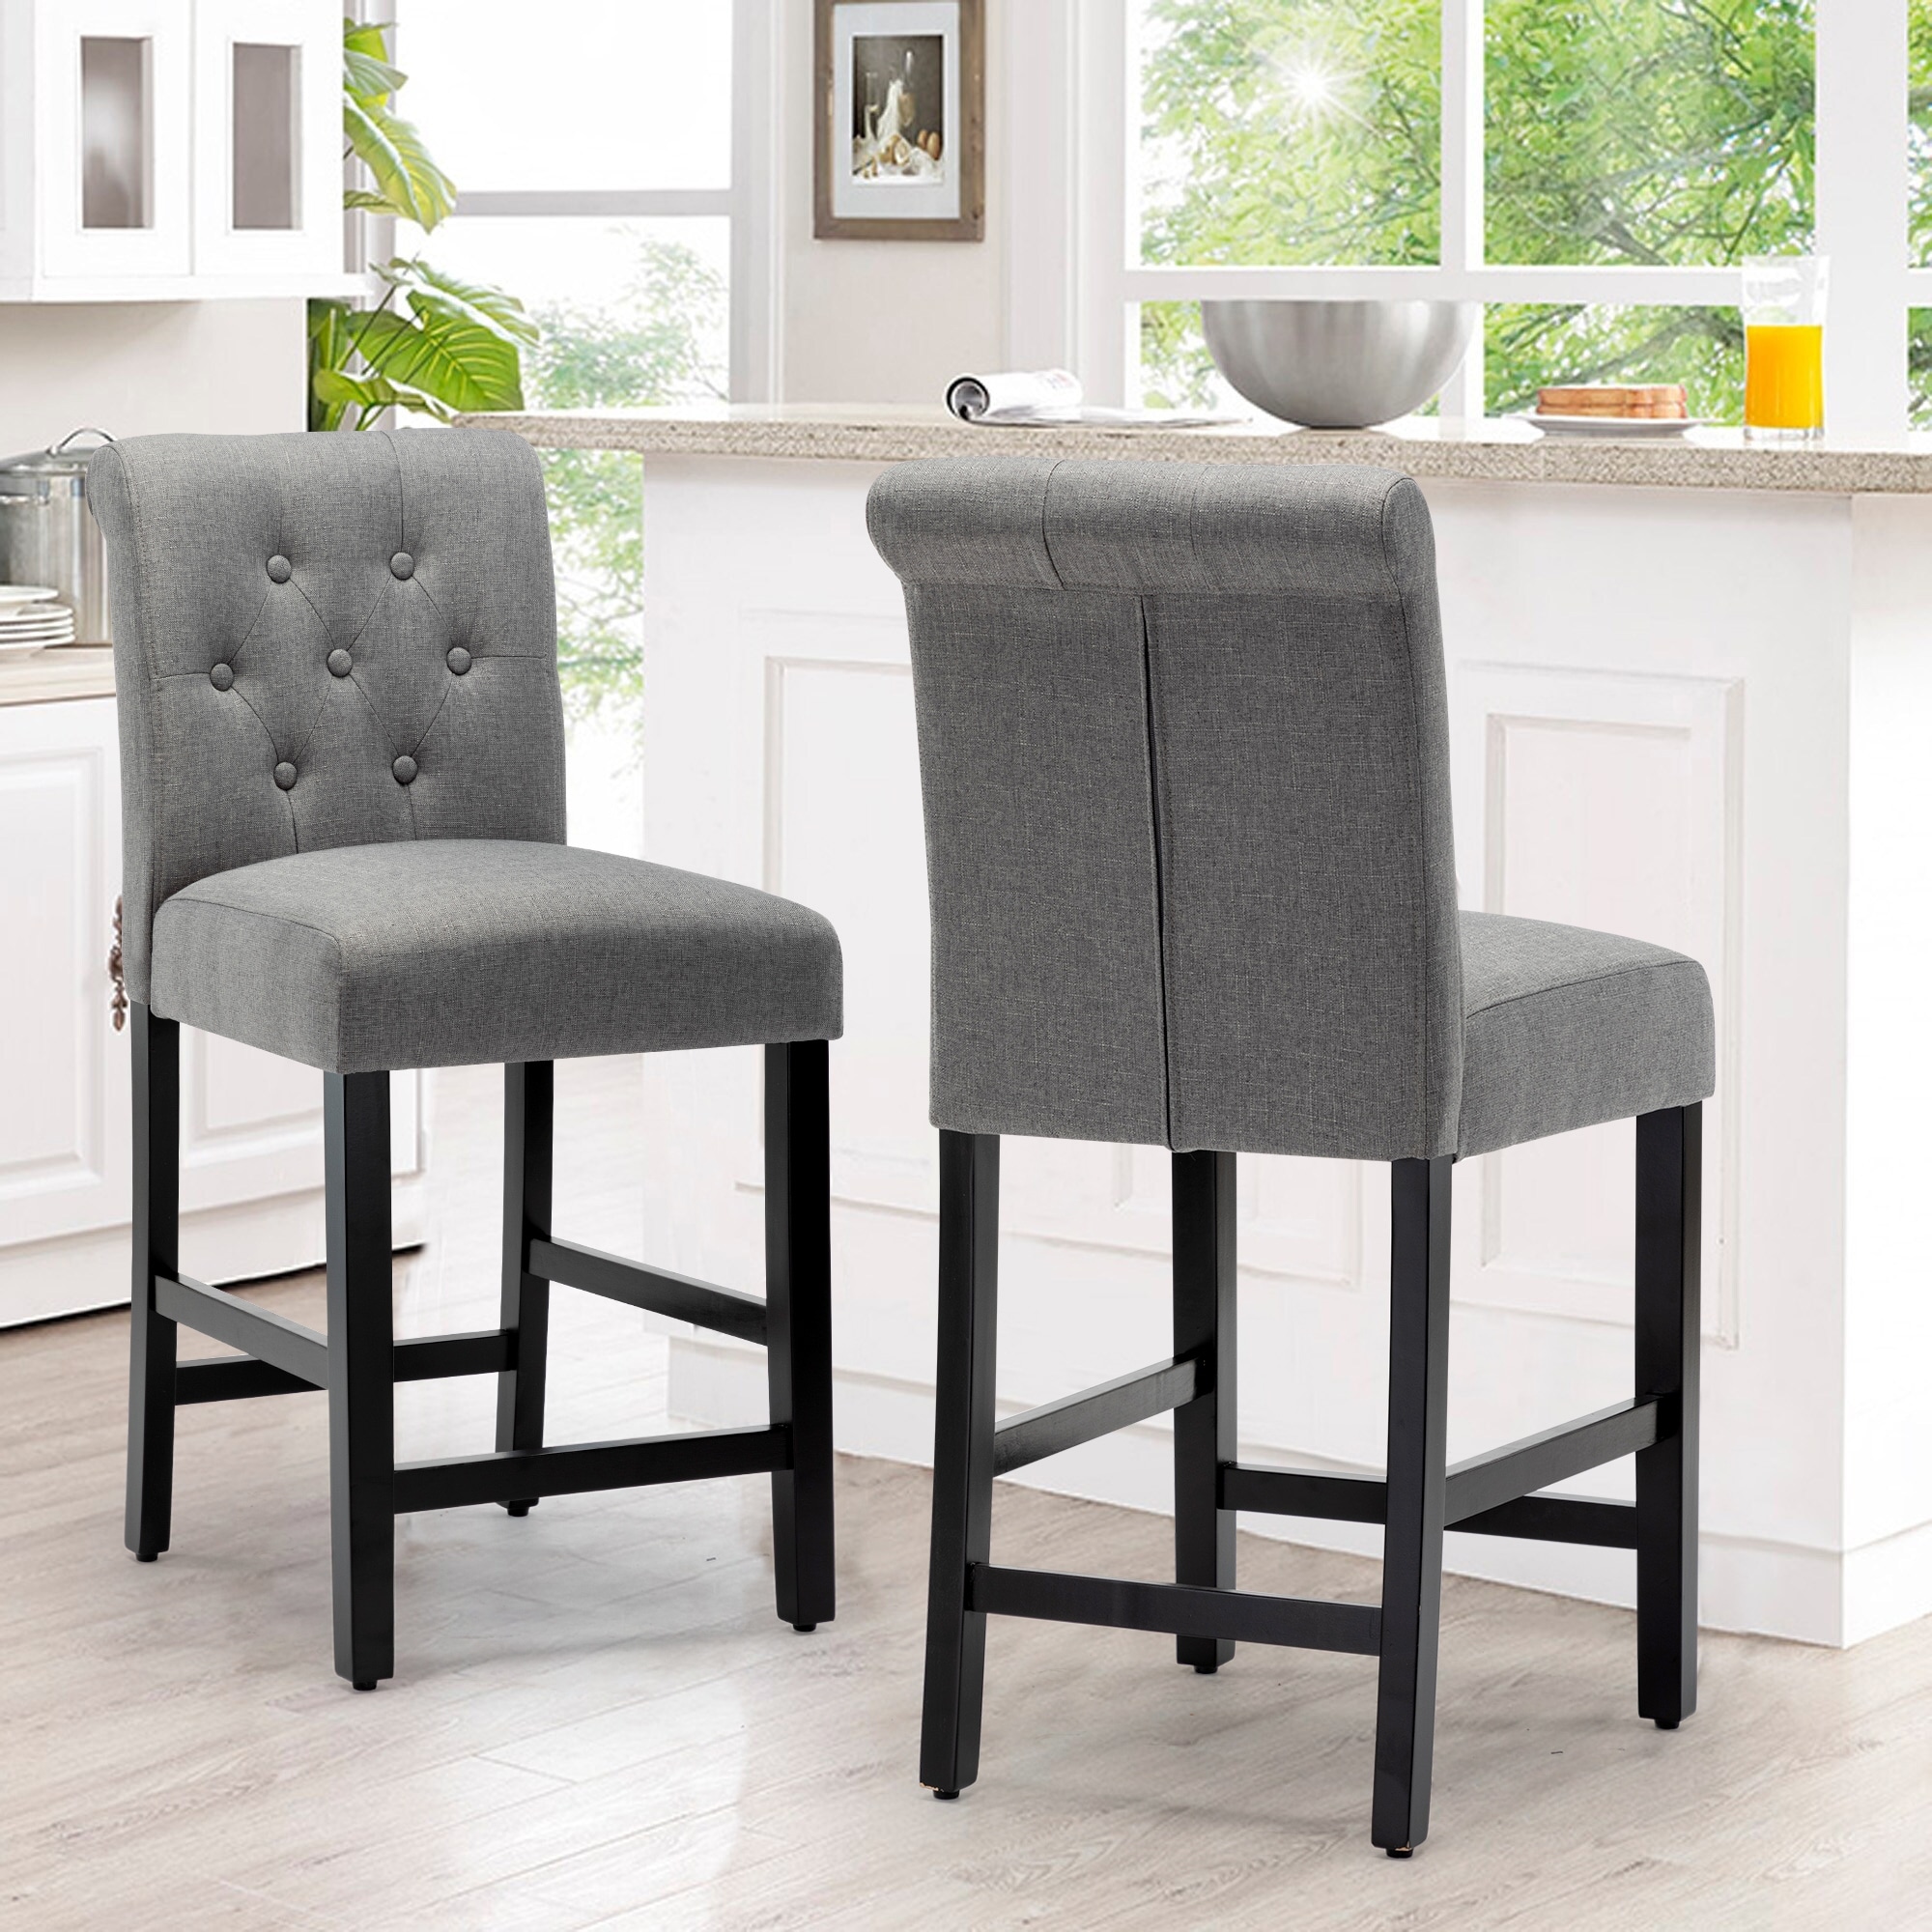 Grey Tufted Counter and Bar Stools - Bed Bath & Beyond